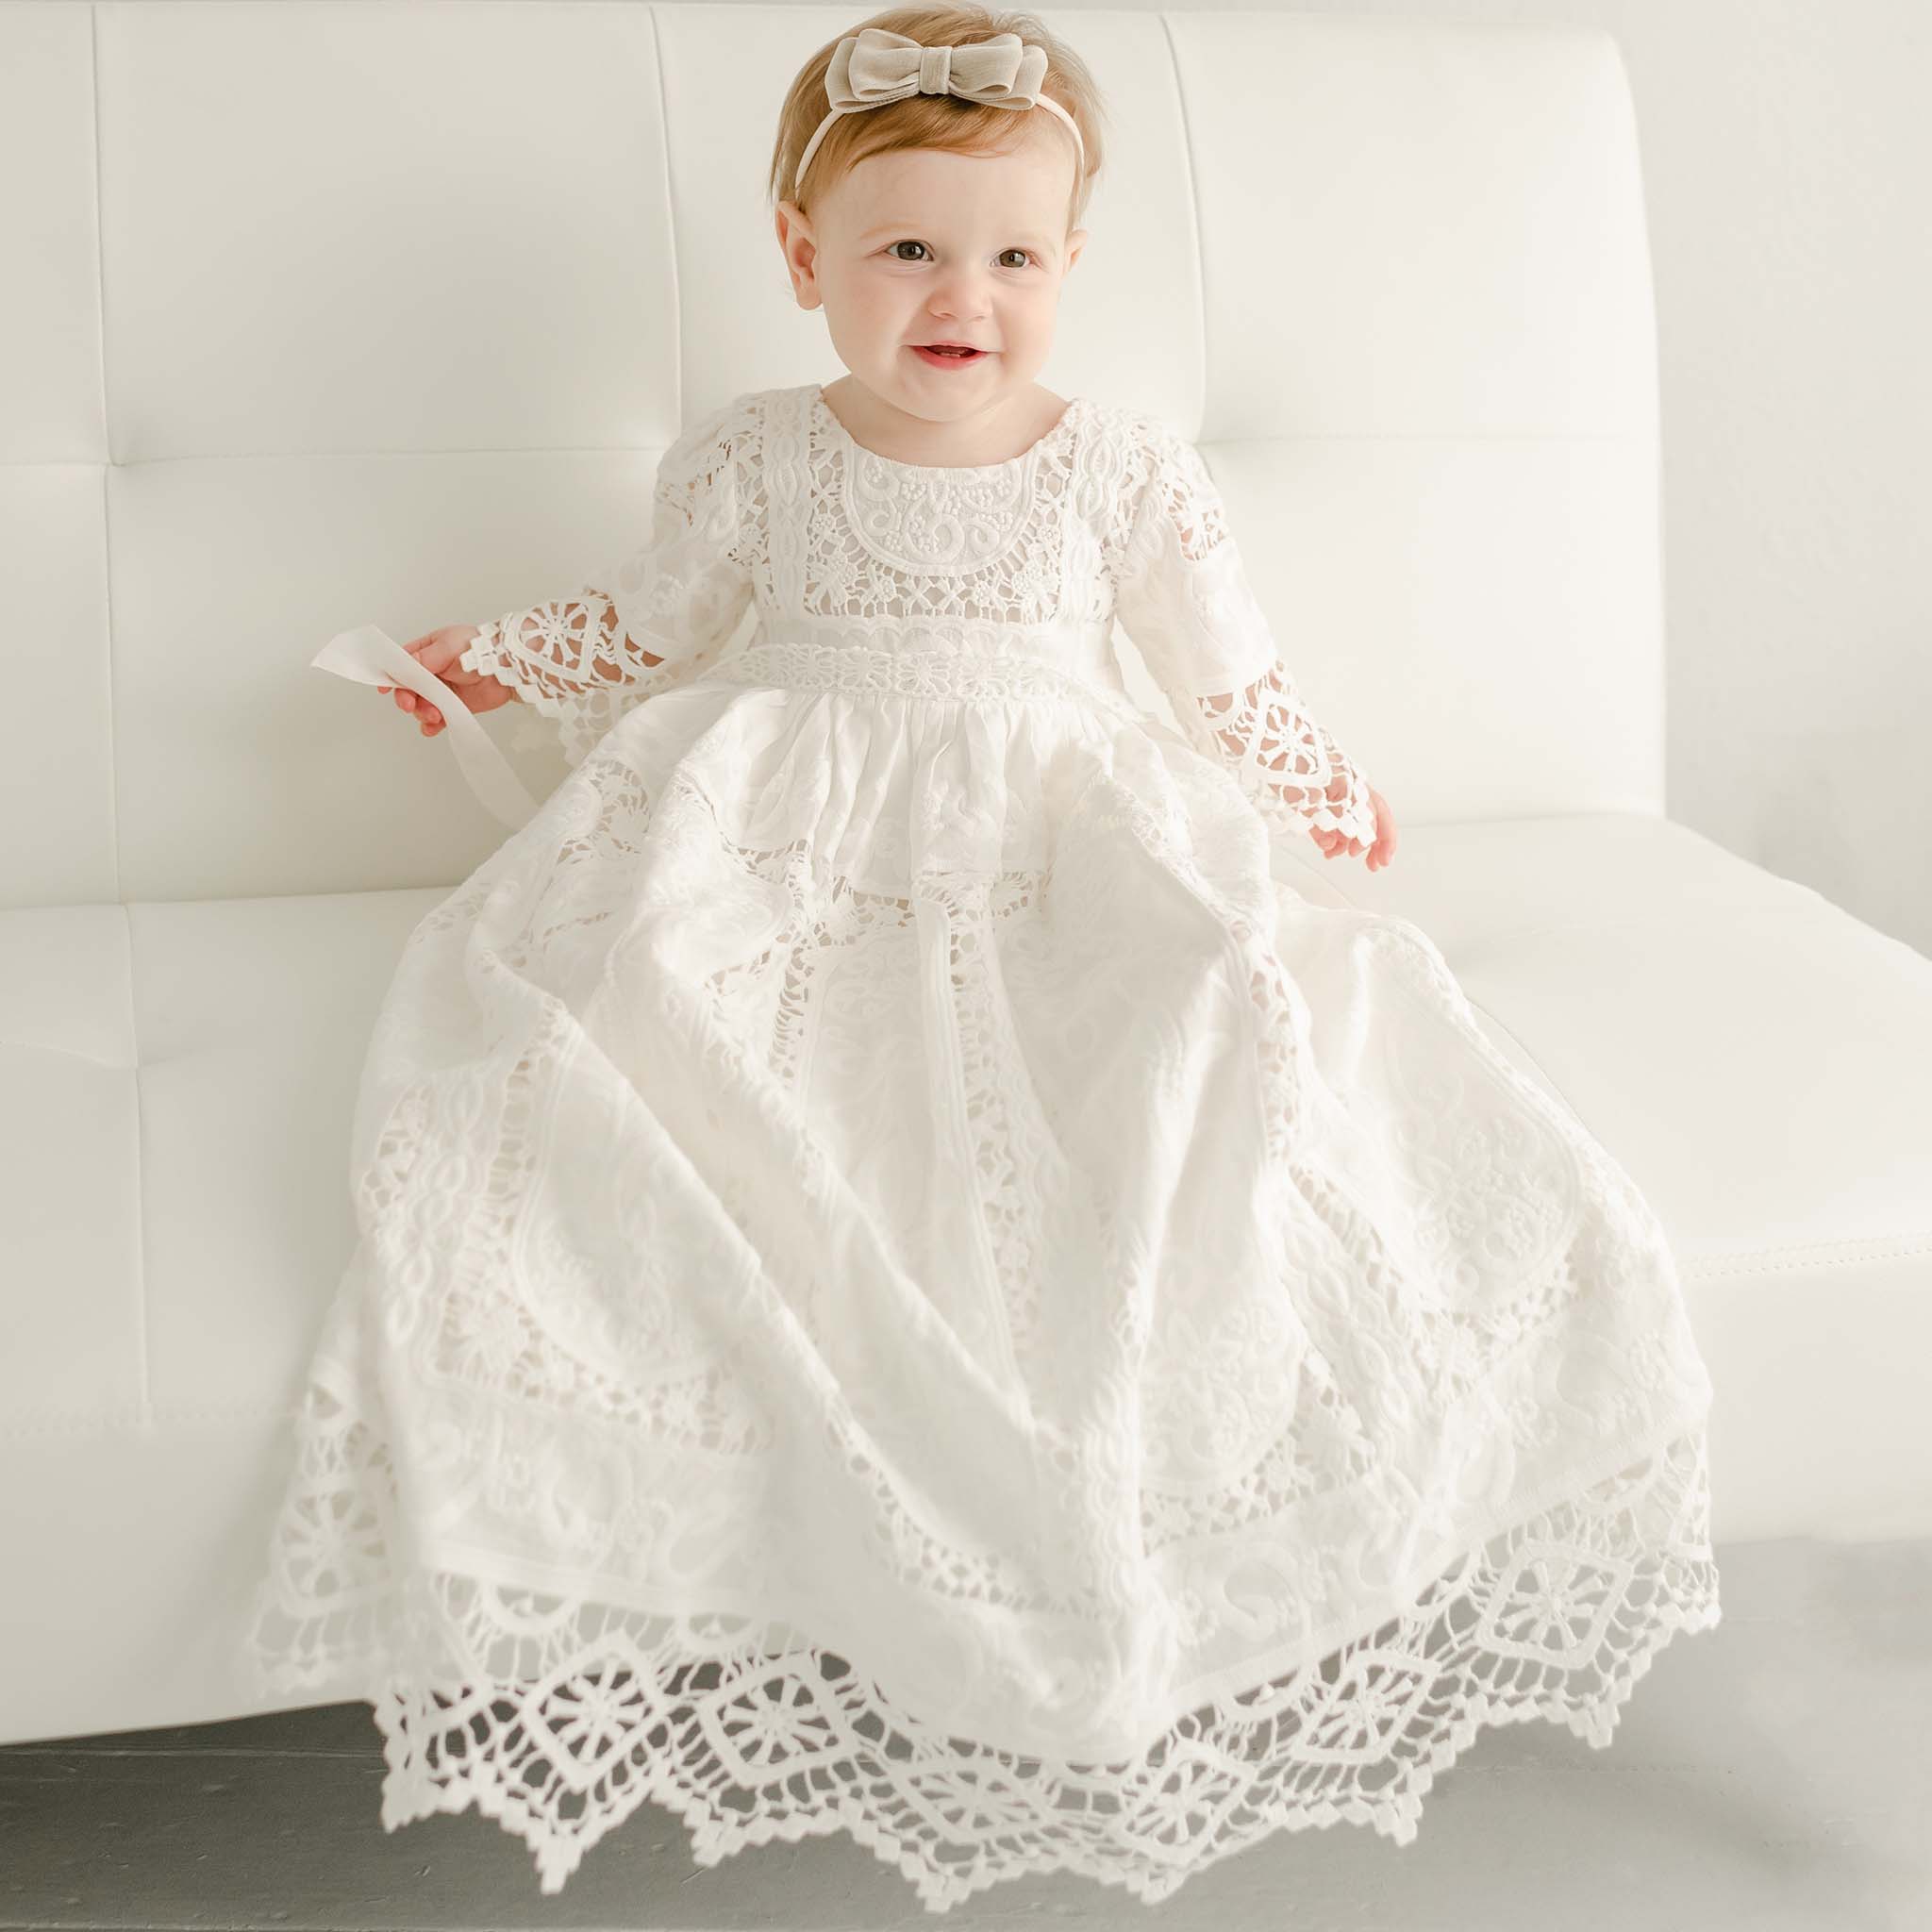 christening gown,christening gowns,heirloom christening gown,Victorian  style christening gown,antique style christening gown,vintage style christening  gown,heirloom baptism gown,Victorian style baptism gown,antique style baptism  gown,vintage style ...